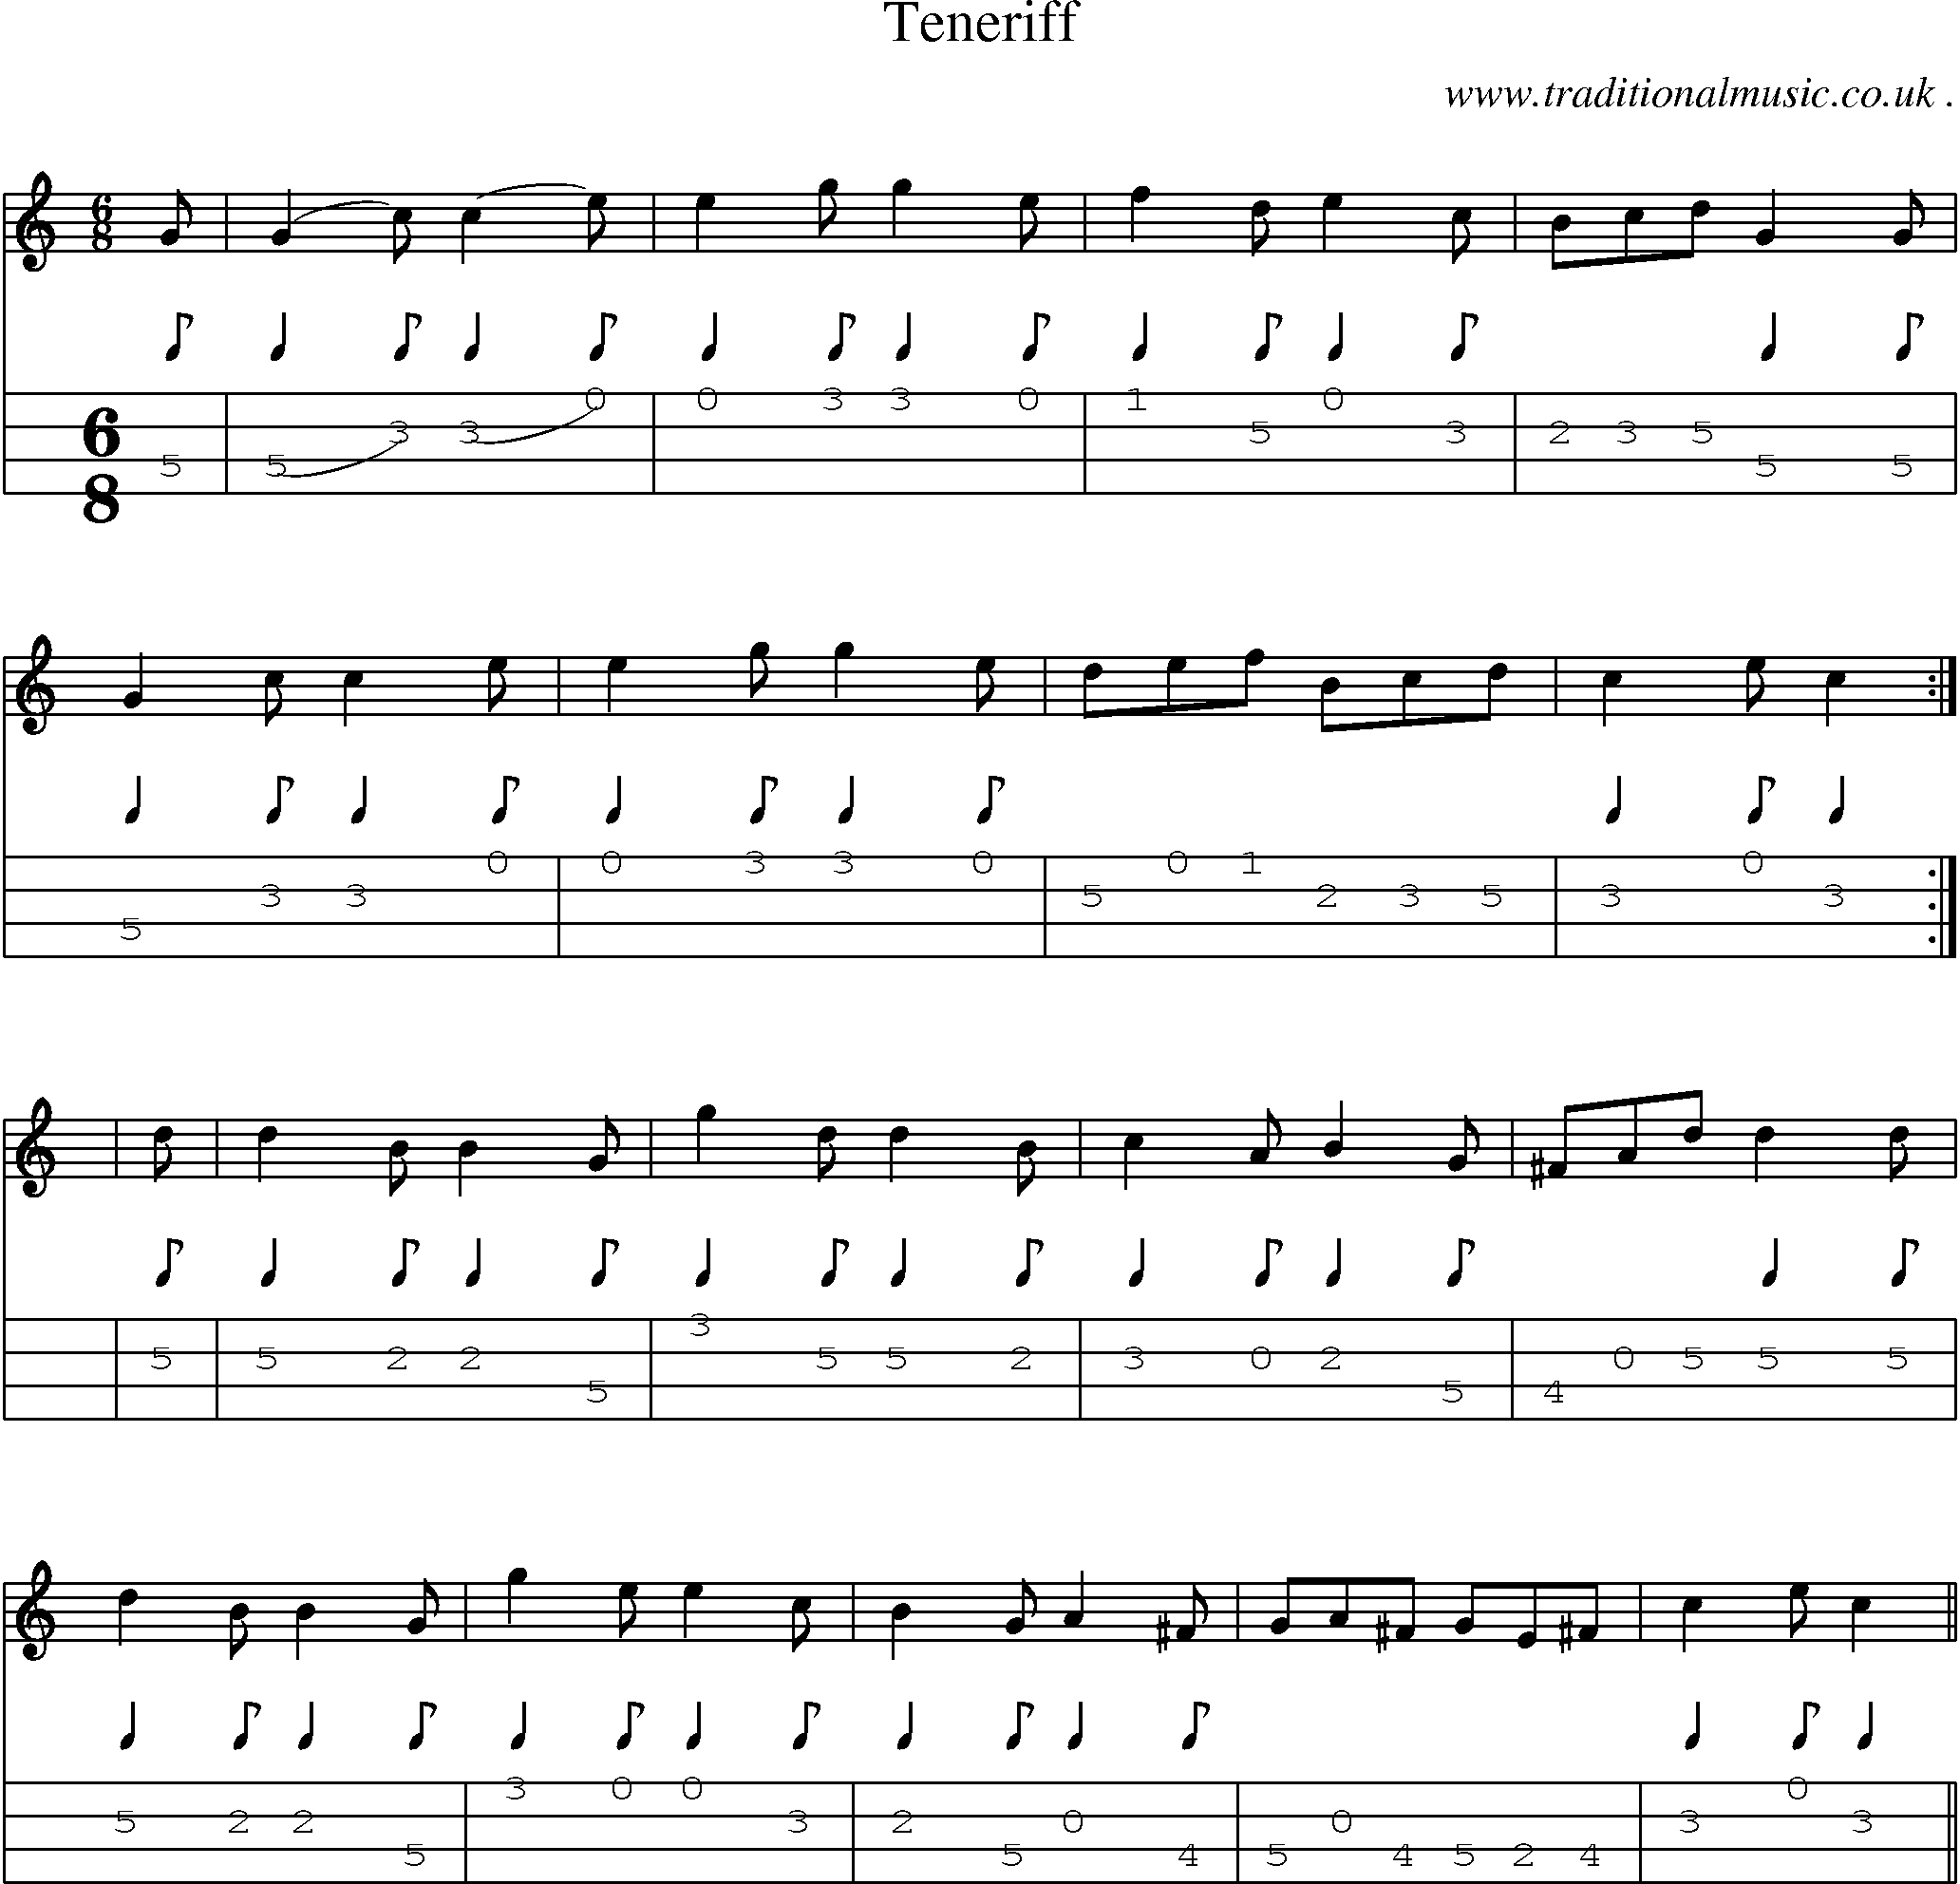 Sheet-Music and Mandolin Tabs for Teneriff